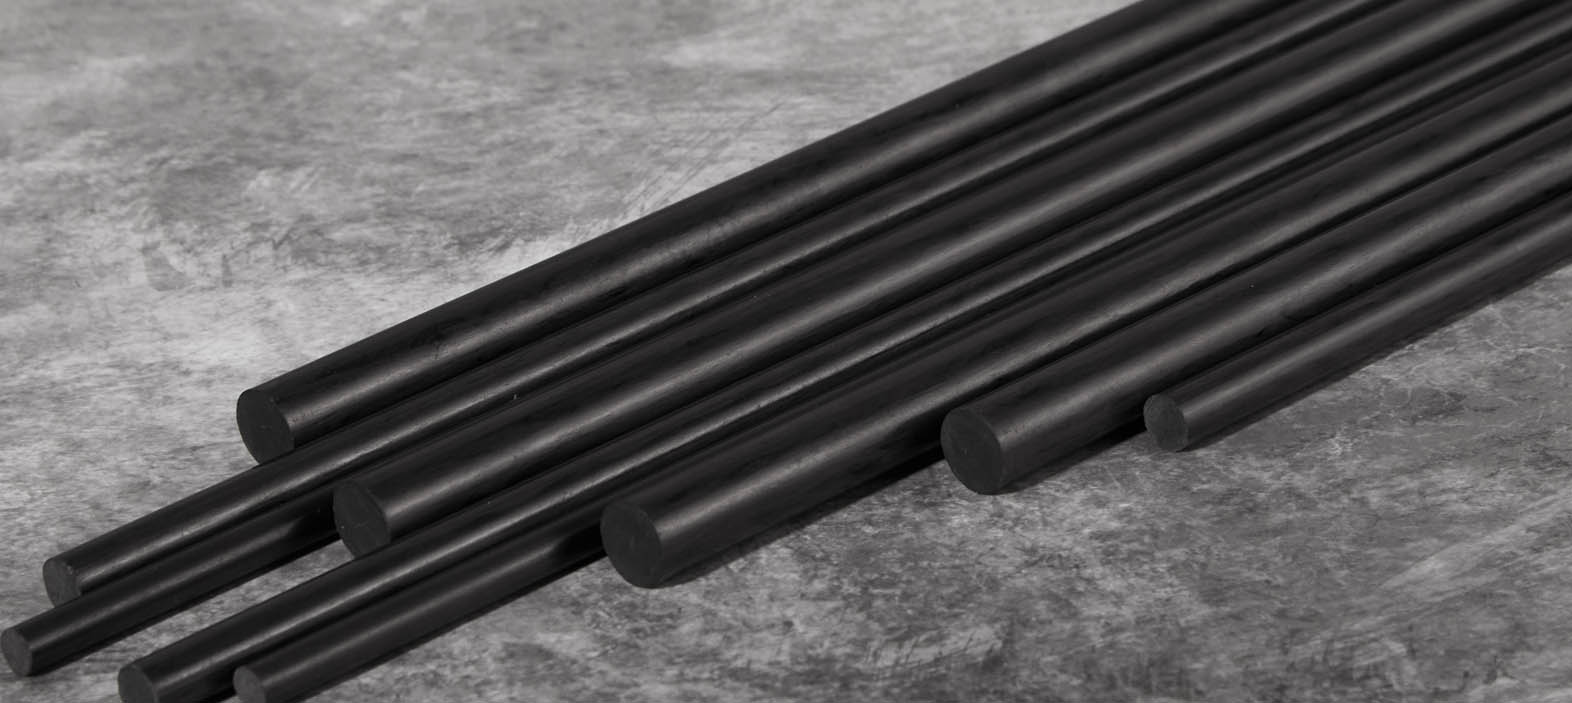 Analyzing the Weight-to-Strength Ratio of Carbon Fiber Rods  - NitProcomposites